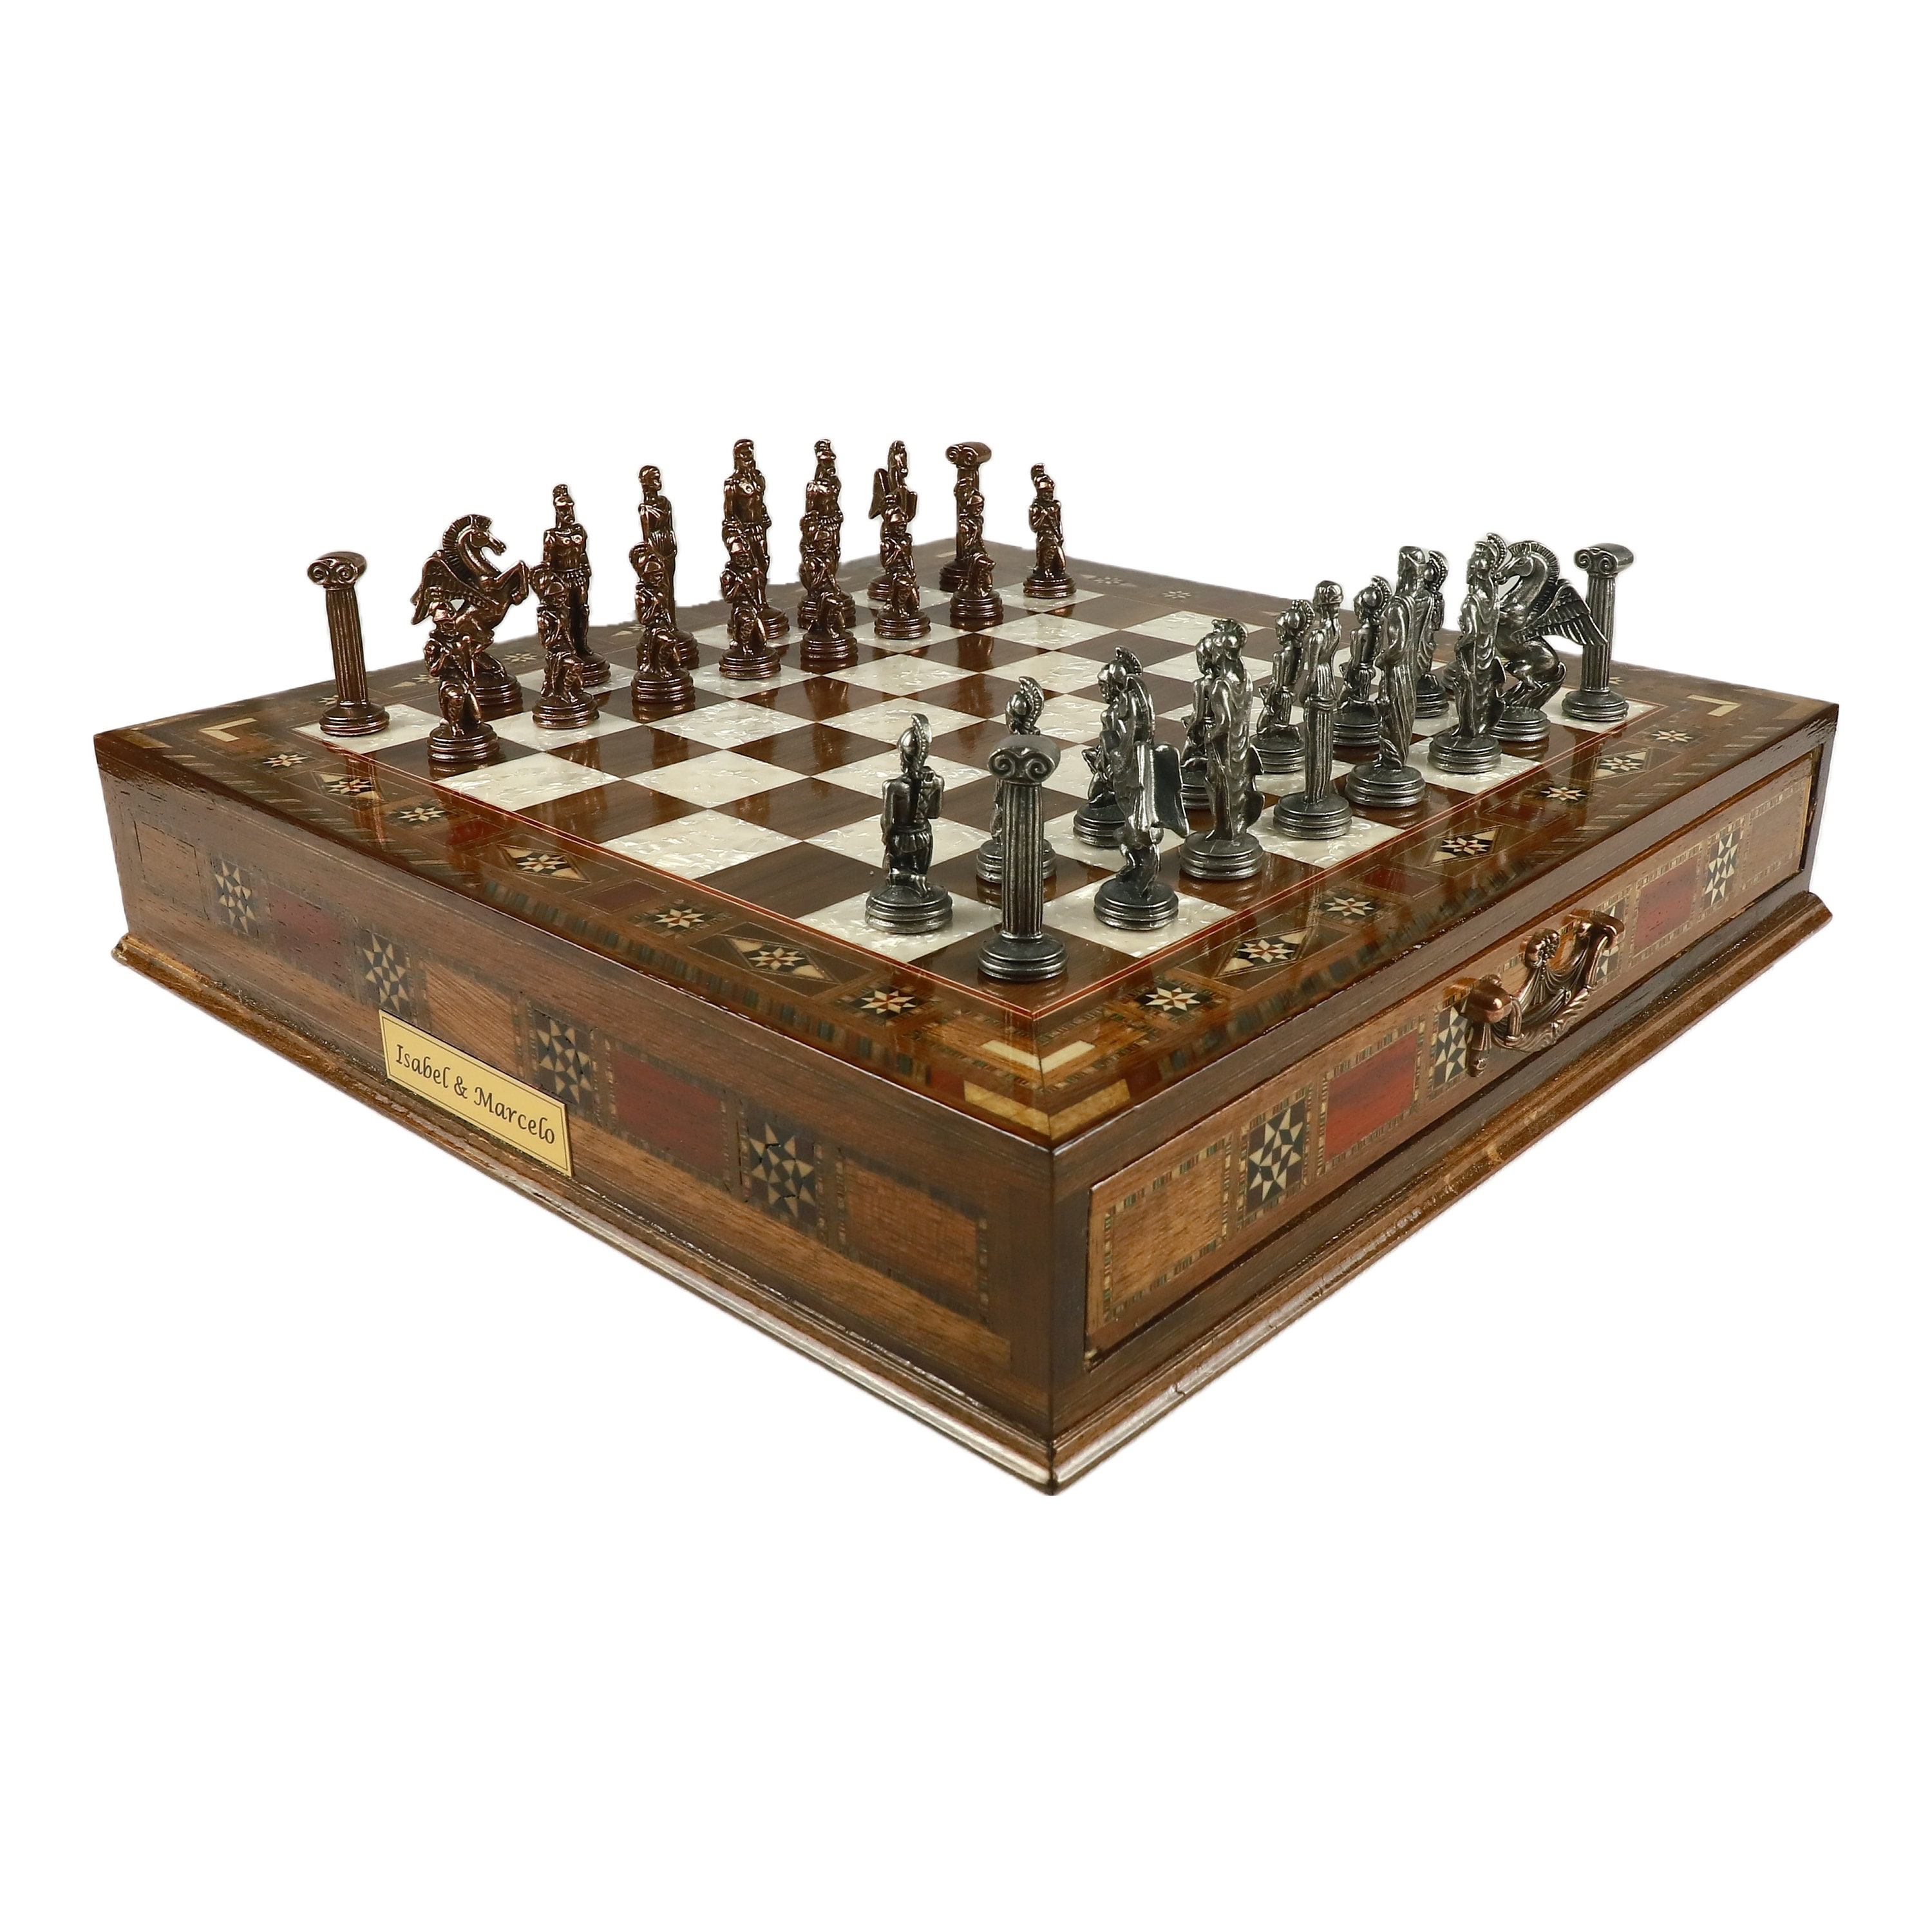 Medieval Theme Metal Chess Set with Blue Ash Burl Chess Board